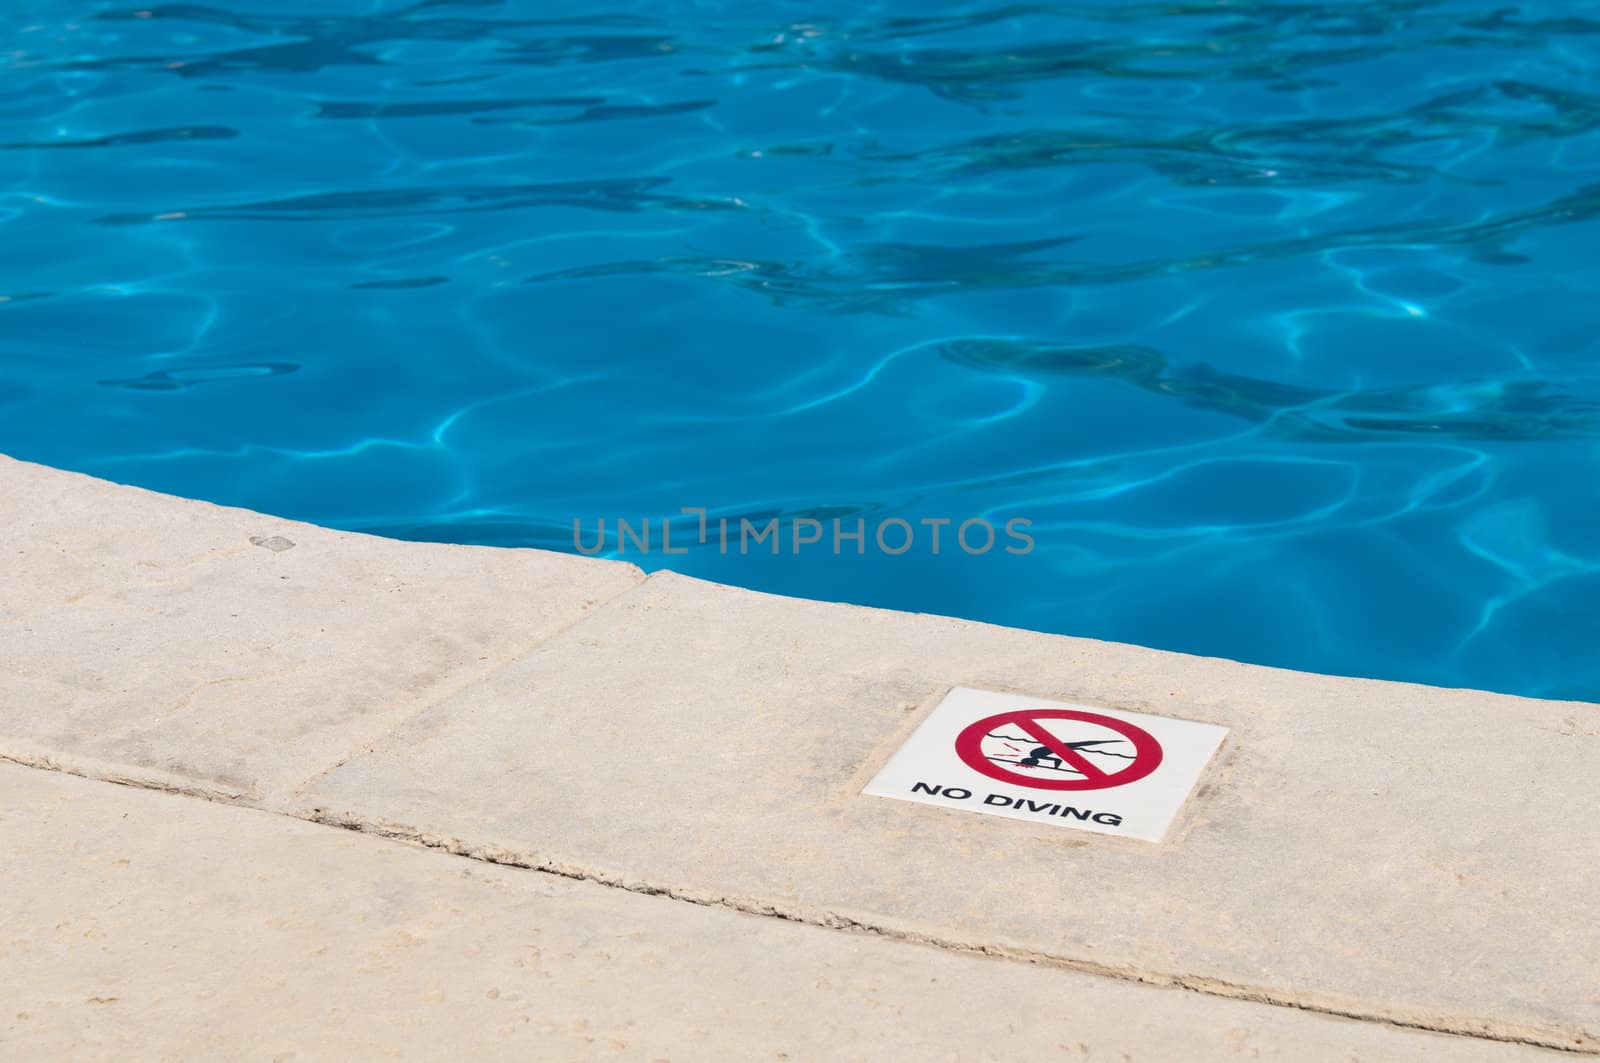 No diving sign by luissantos84